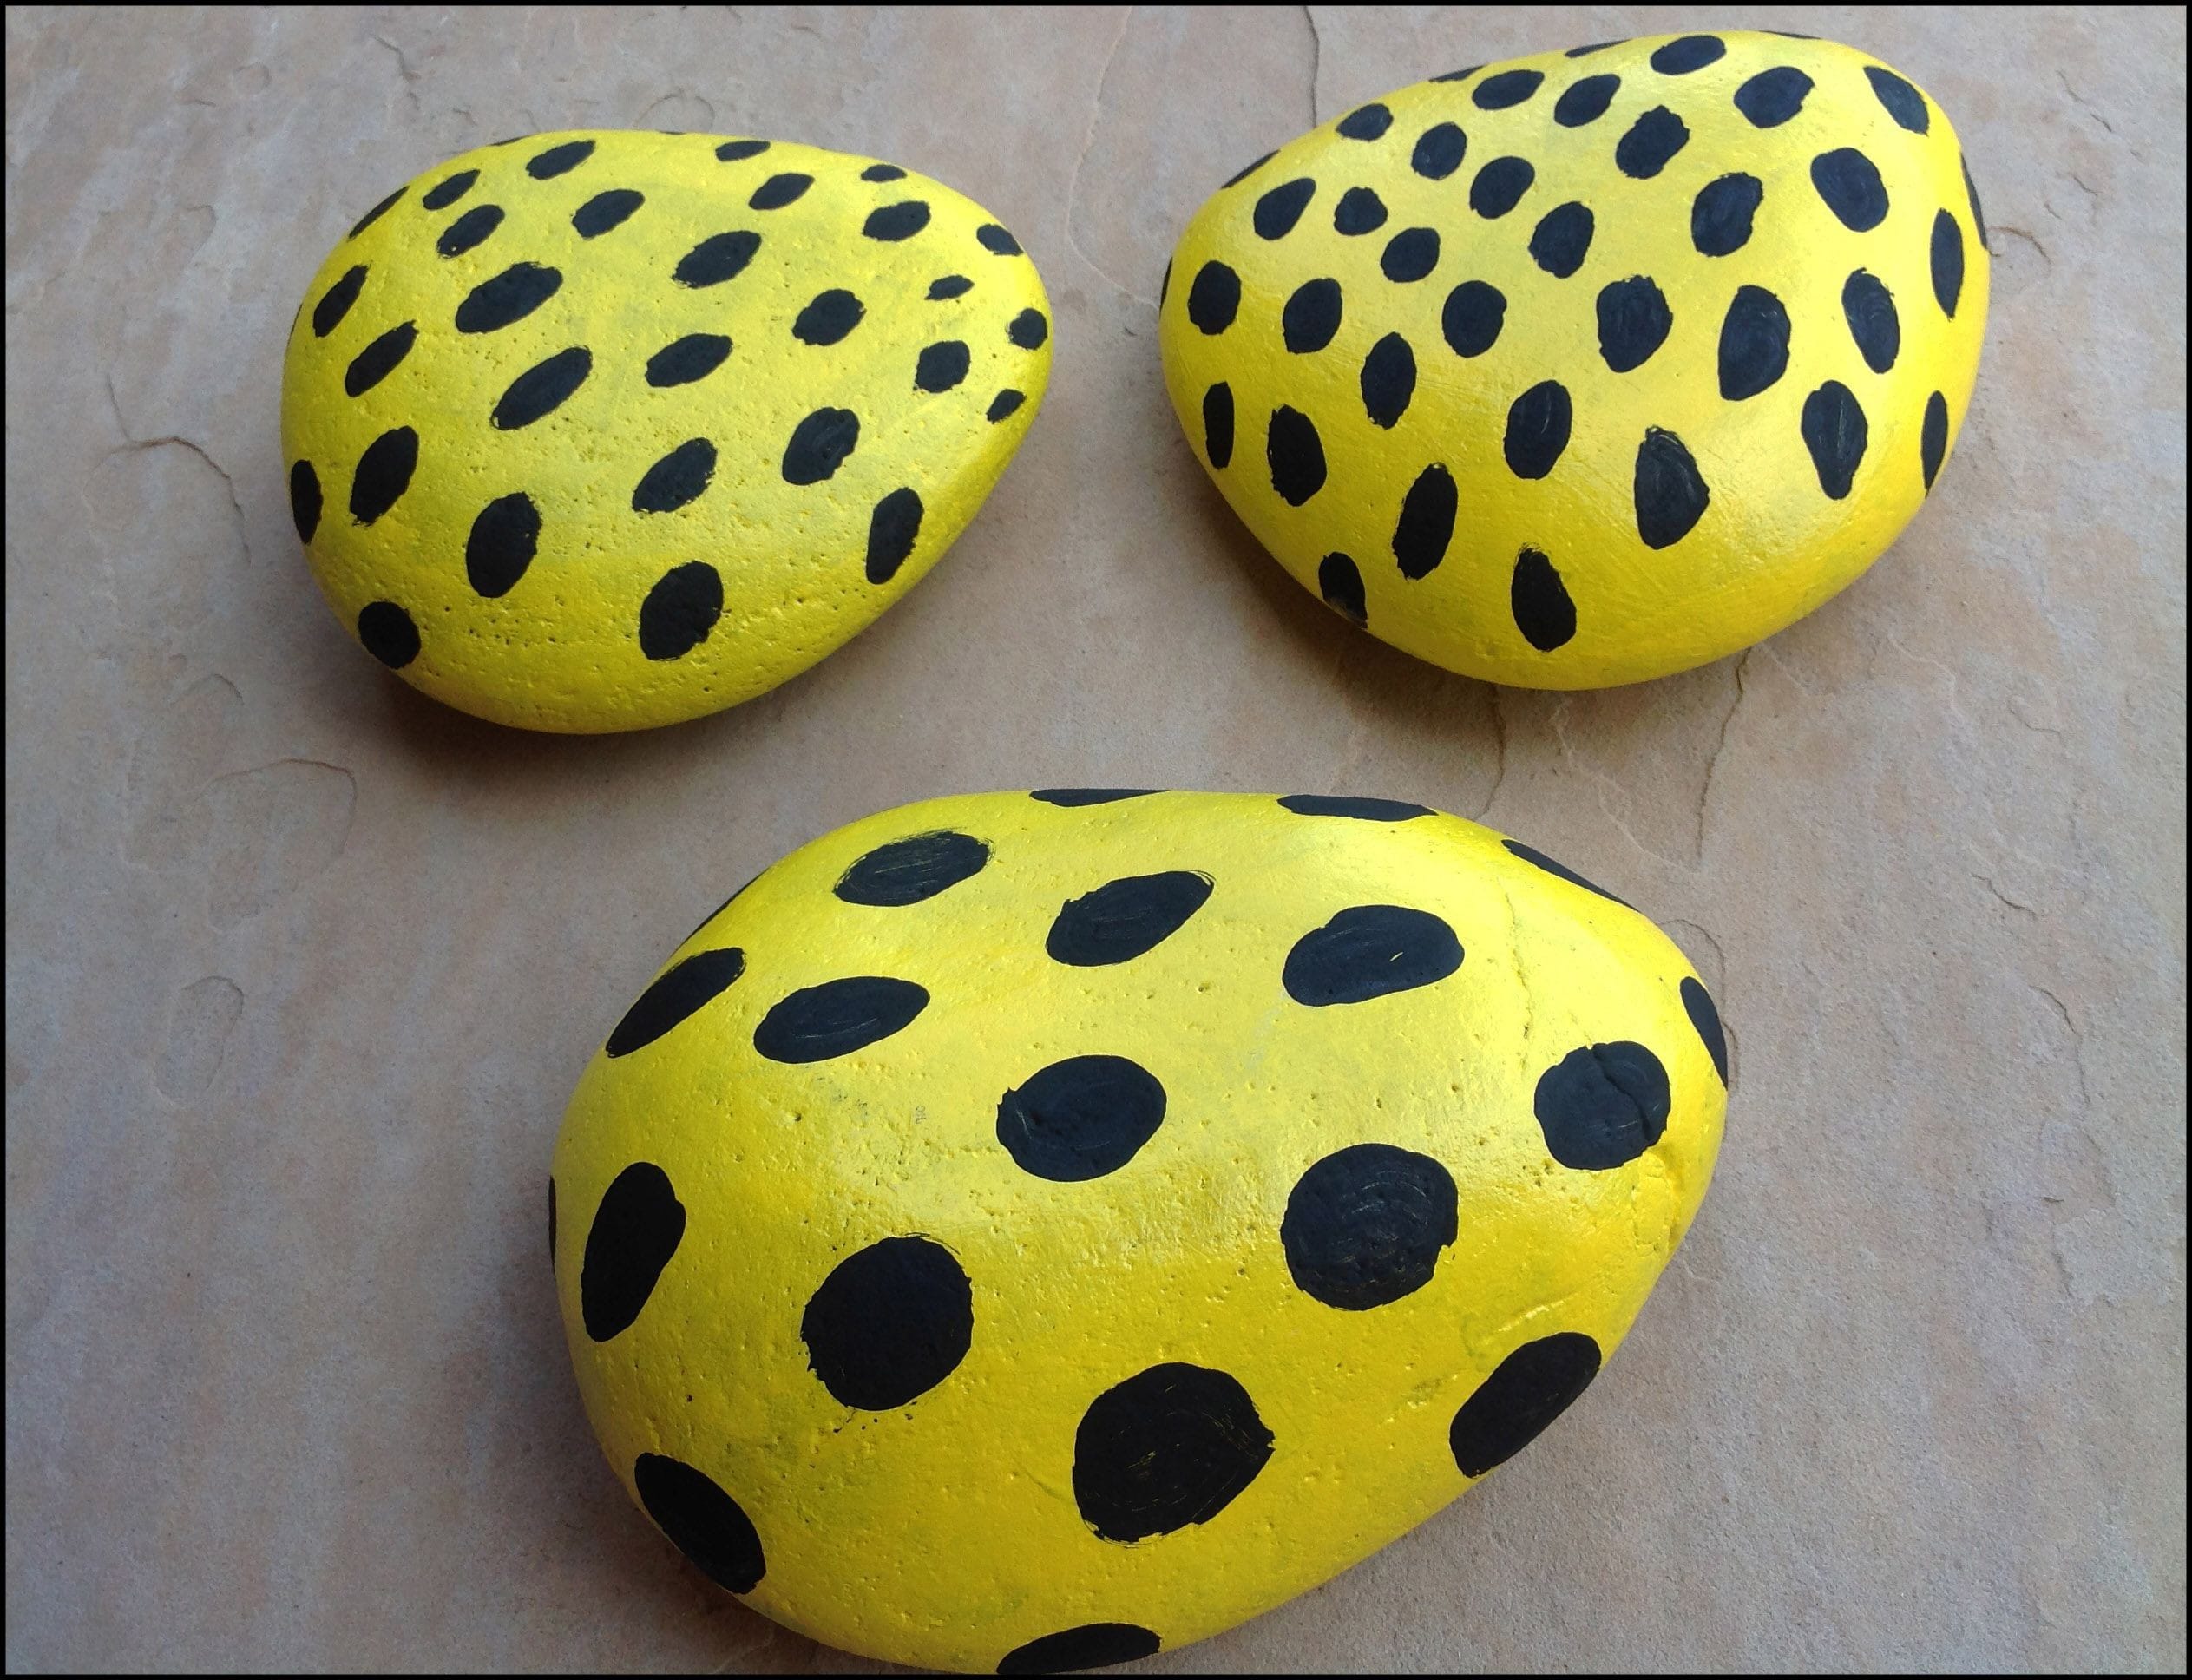 Colorful cheetah spotted rocks. A fun craft project.